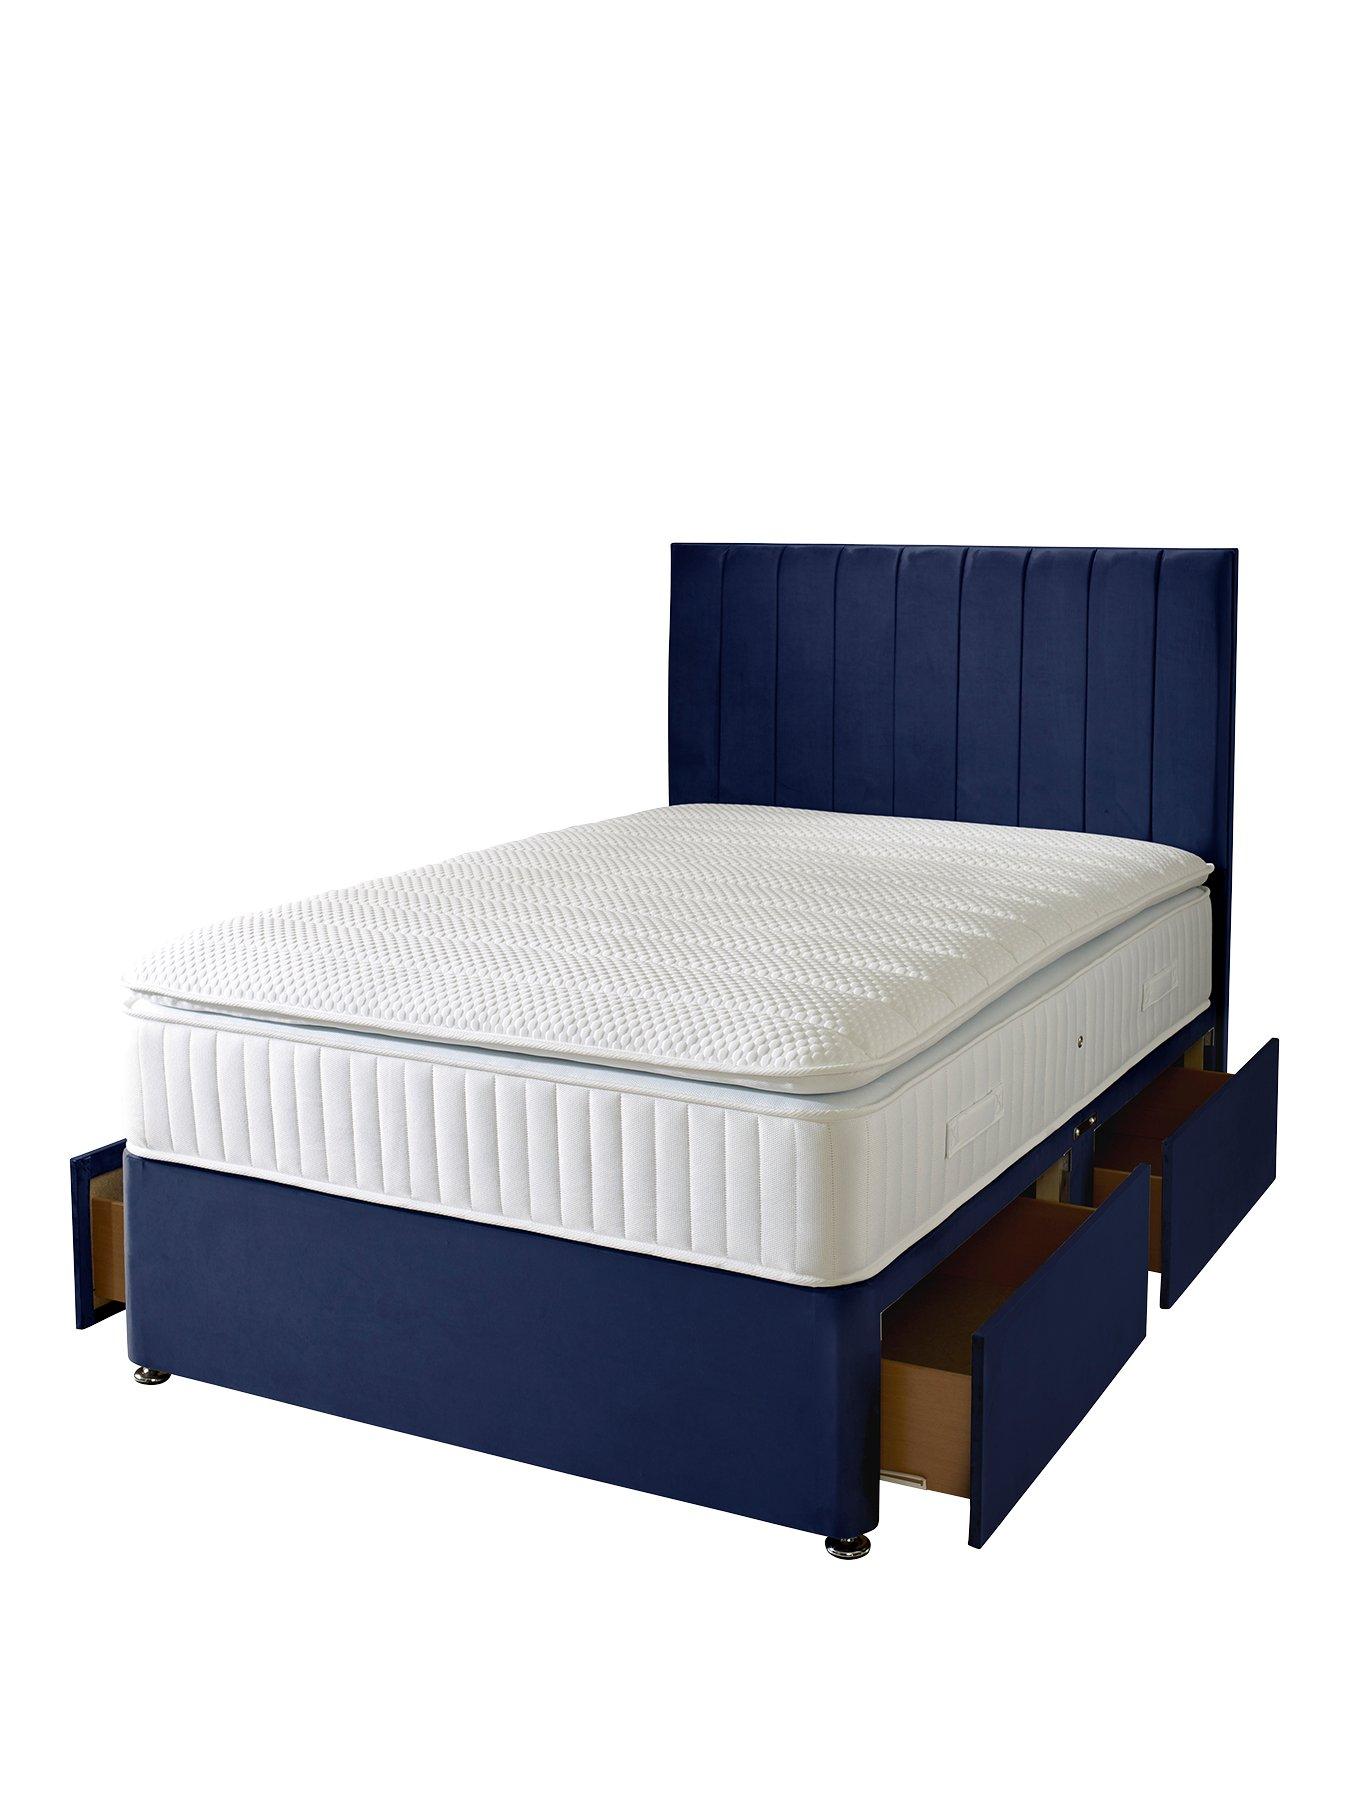 childrens beds on finance